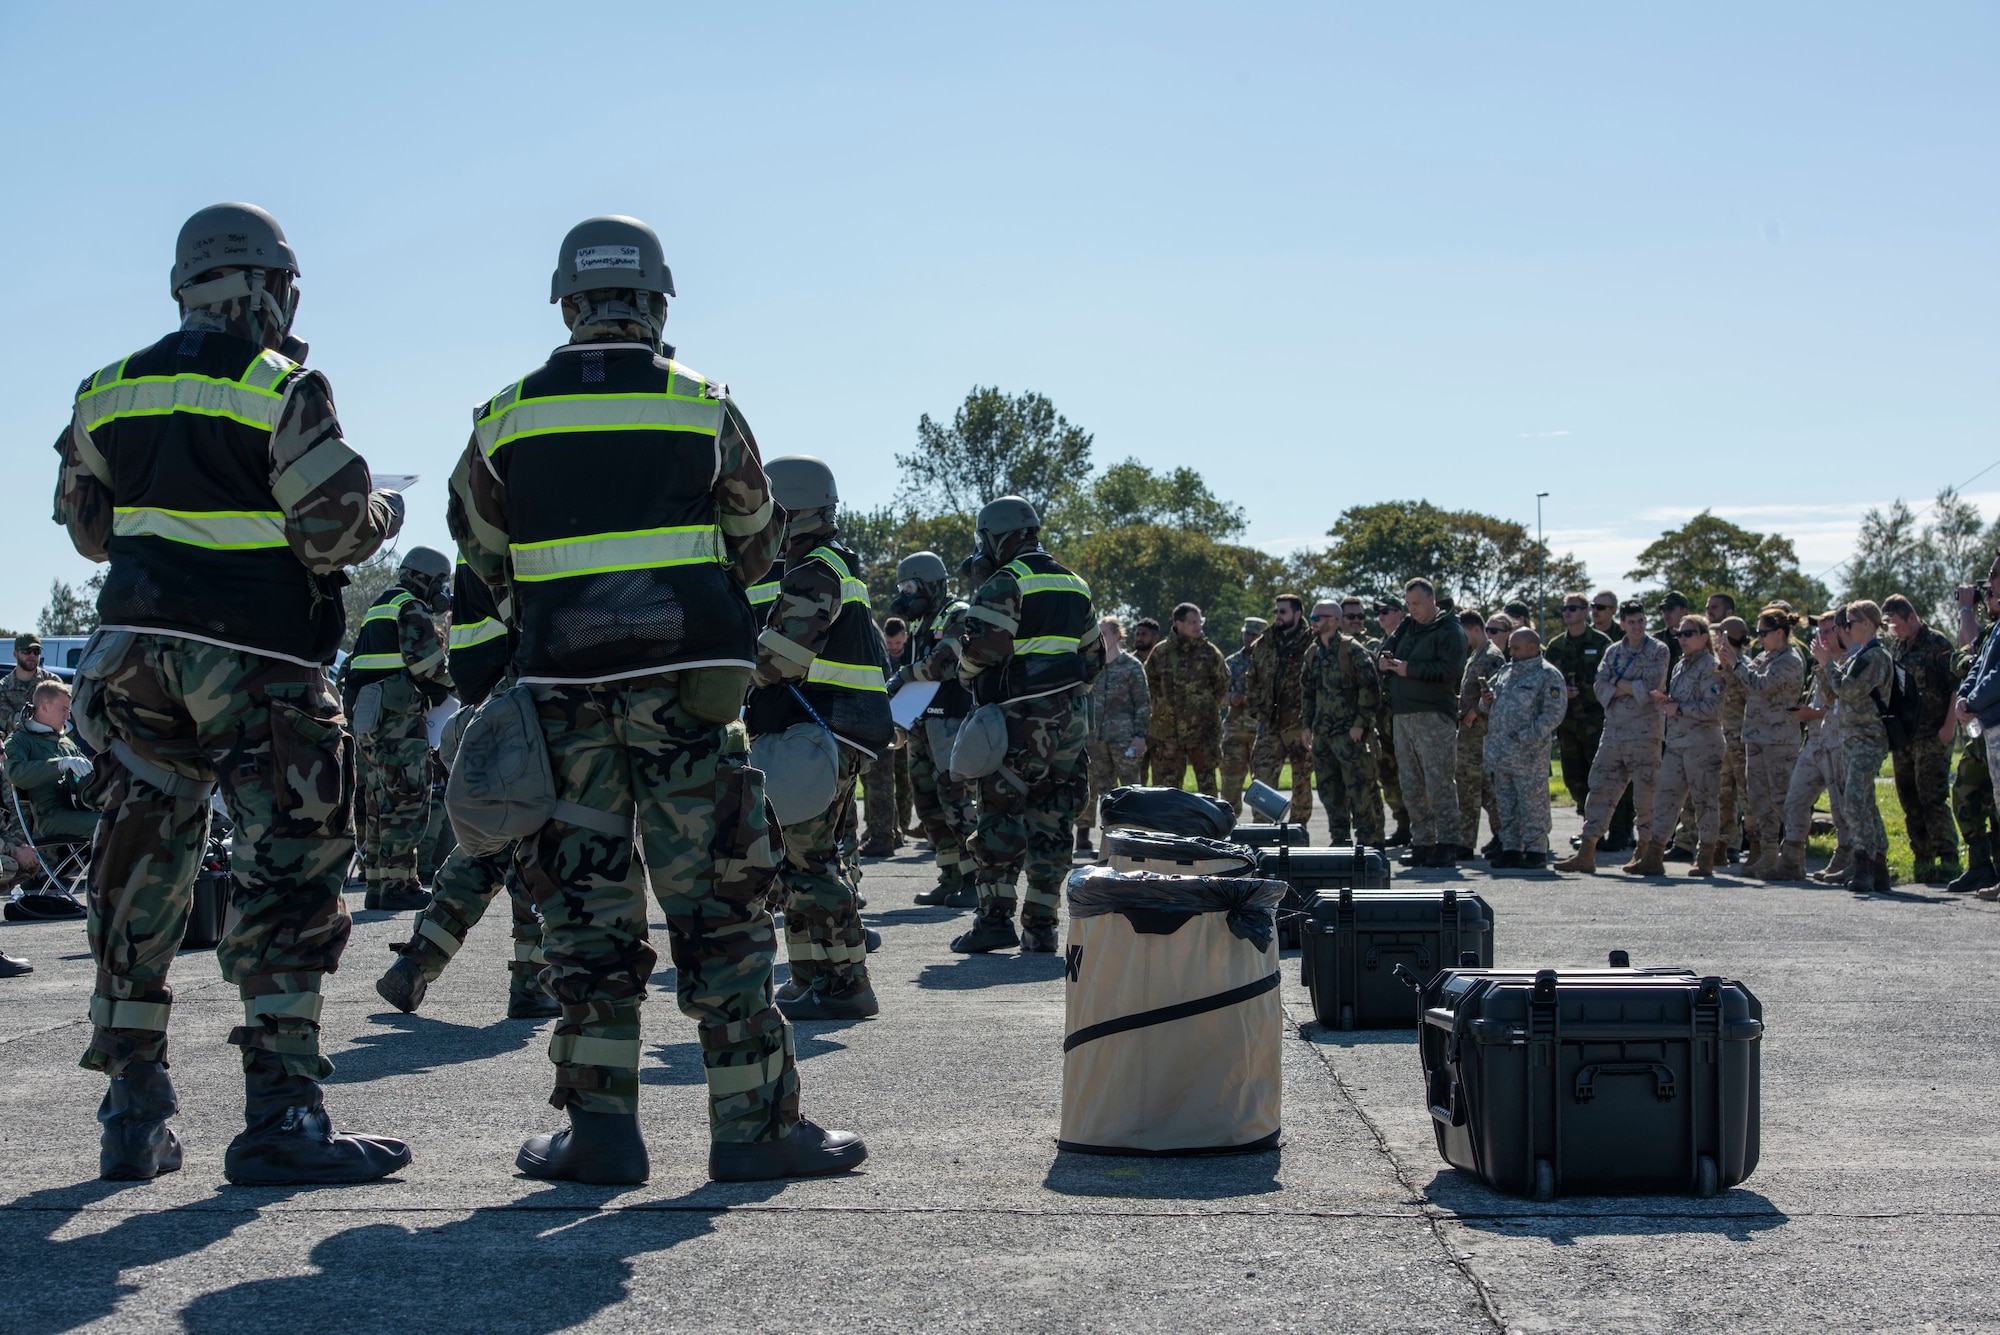 AFE Airmen wait for airmen in other NATO nations air forces to process through a decontamination line